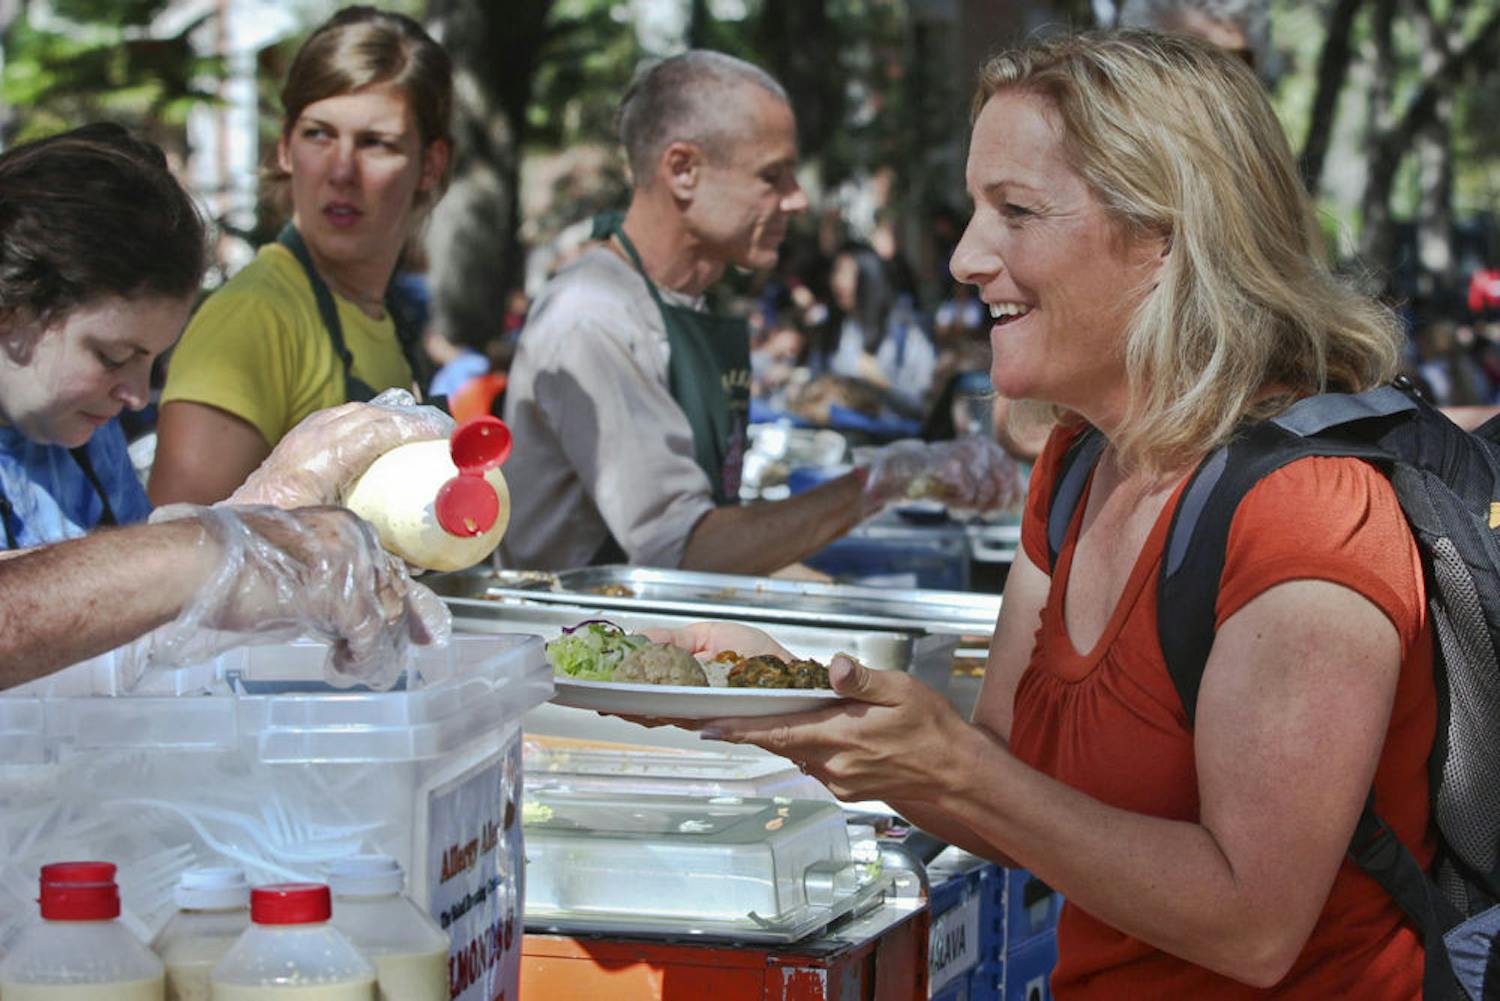 Lisa Athearn, 42-year-old UF public speaking professor, gets krishna food at the Plaza of the Americas on Nov. 16, 2015. "I ate krishna when I was a student here 13 years ago," she said. "It's the best $3.50 spent."